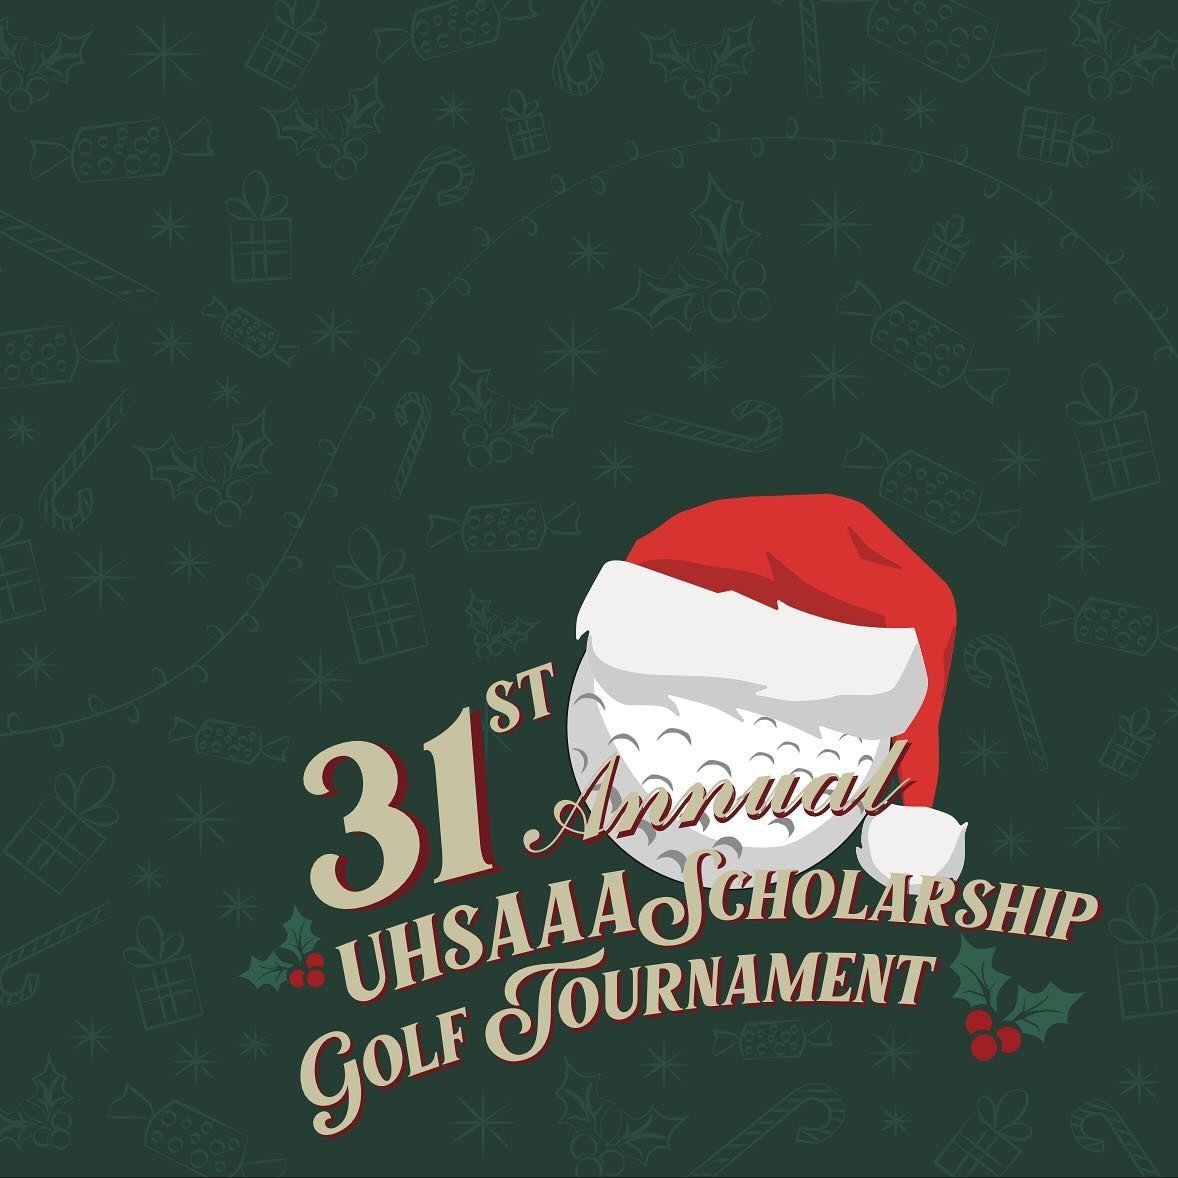 ANNOUNCING OUR 31ST ANNUAL UHSAAA SCHOLARSHIP GOLF TOURNAMENT!!

When: July 19, 2024
Where: Hawaii Prince Golf Club
Theme: Christmas in July (wear your best outfit that fits the theme)

Register by July 5th at www.uhsaaa.org